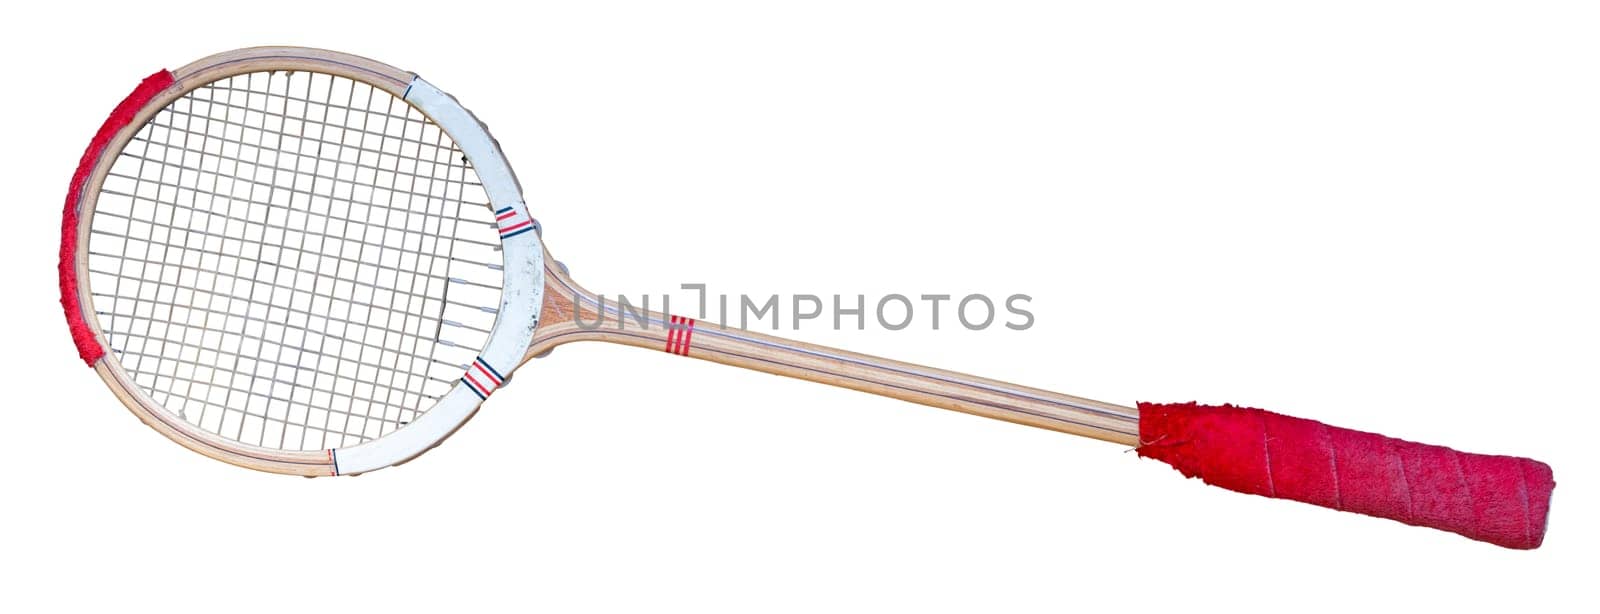 Vintage Wooden Squash Racket, Isolated On A White Background